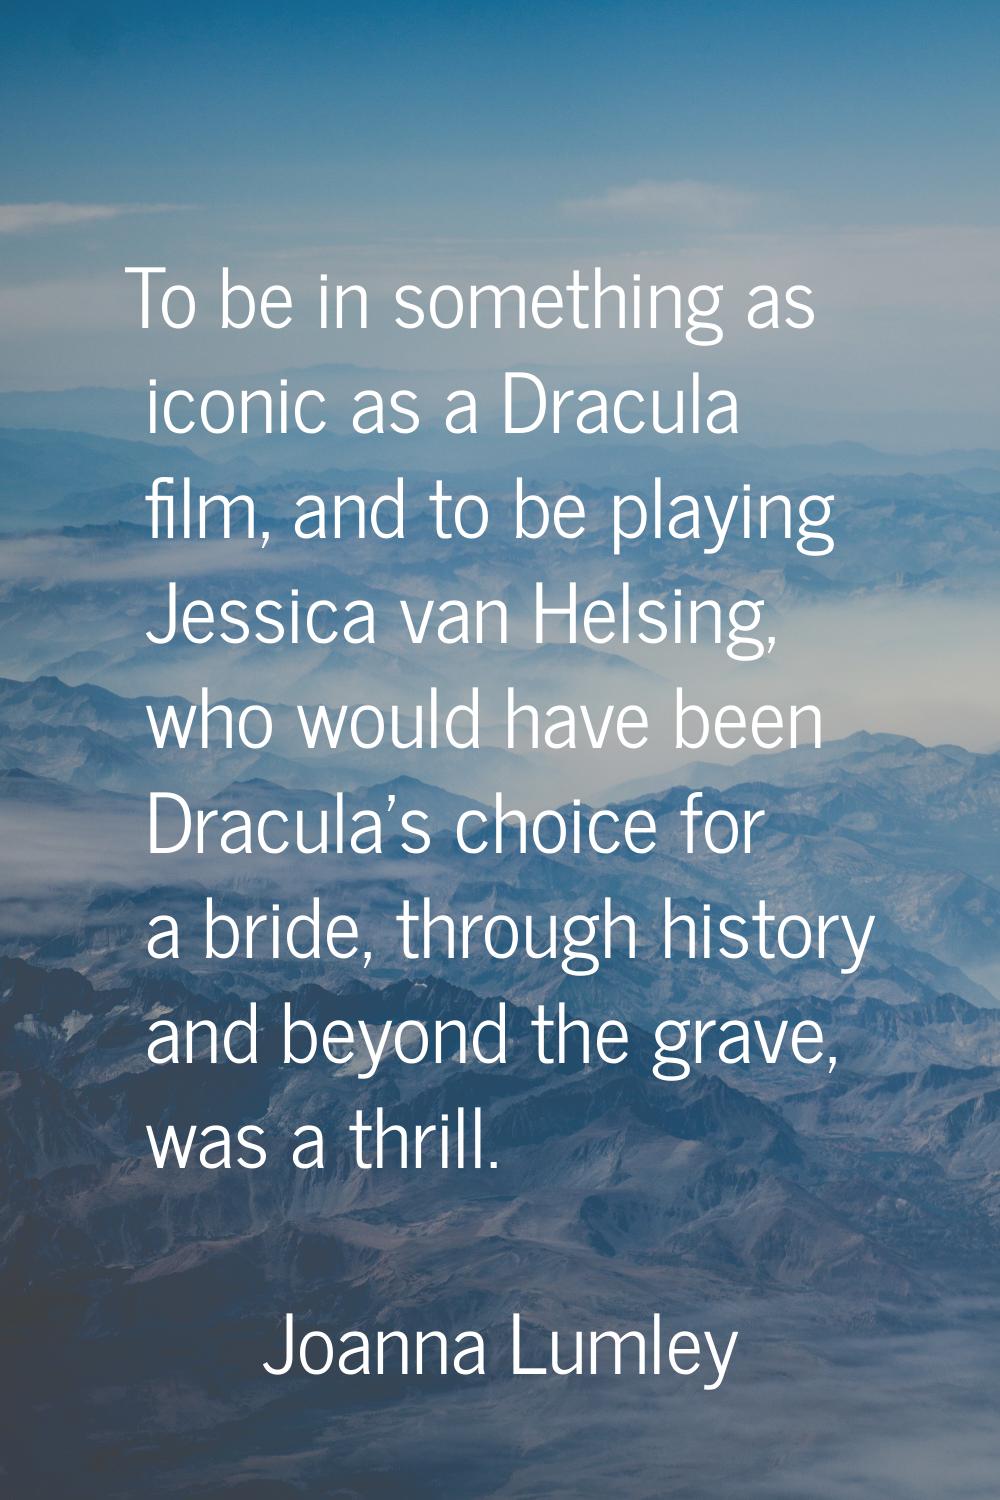 To be in something as iconic as a Dracula film, and to be playing Jessica van Helsing, who would ha